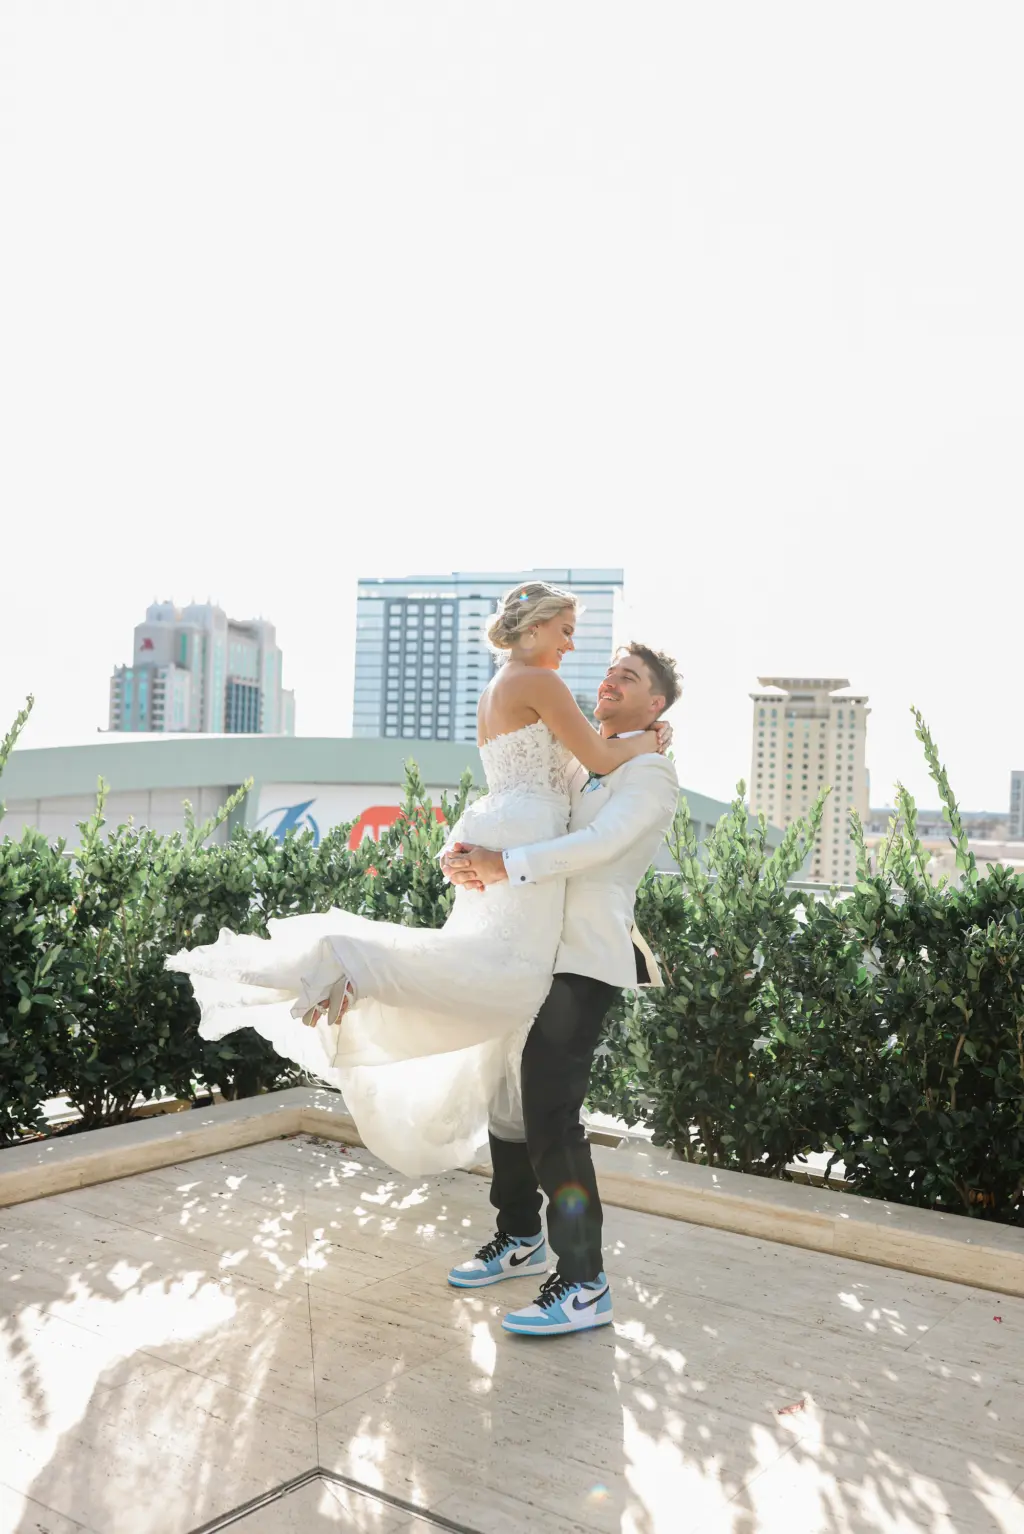 Bride and Groom First Look Rooftop Wedding Portrait Tampa Skyline | Photographer Lifelong Photography